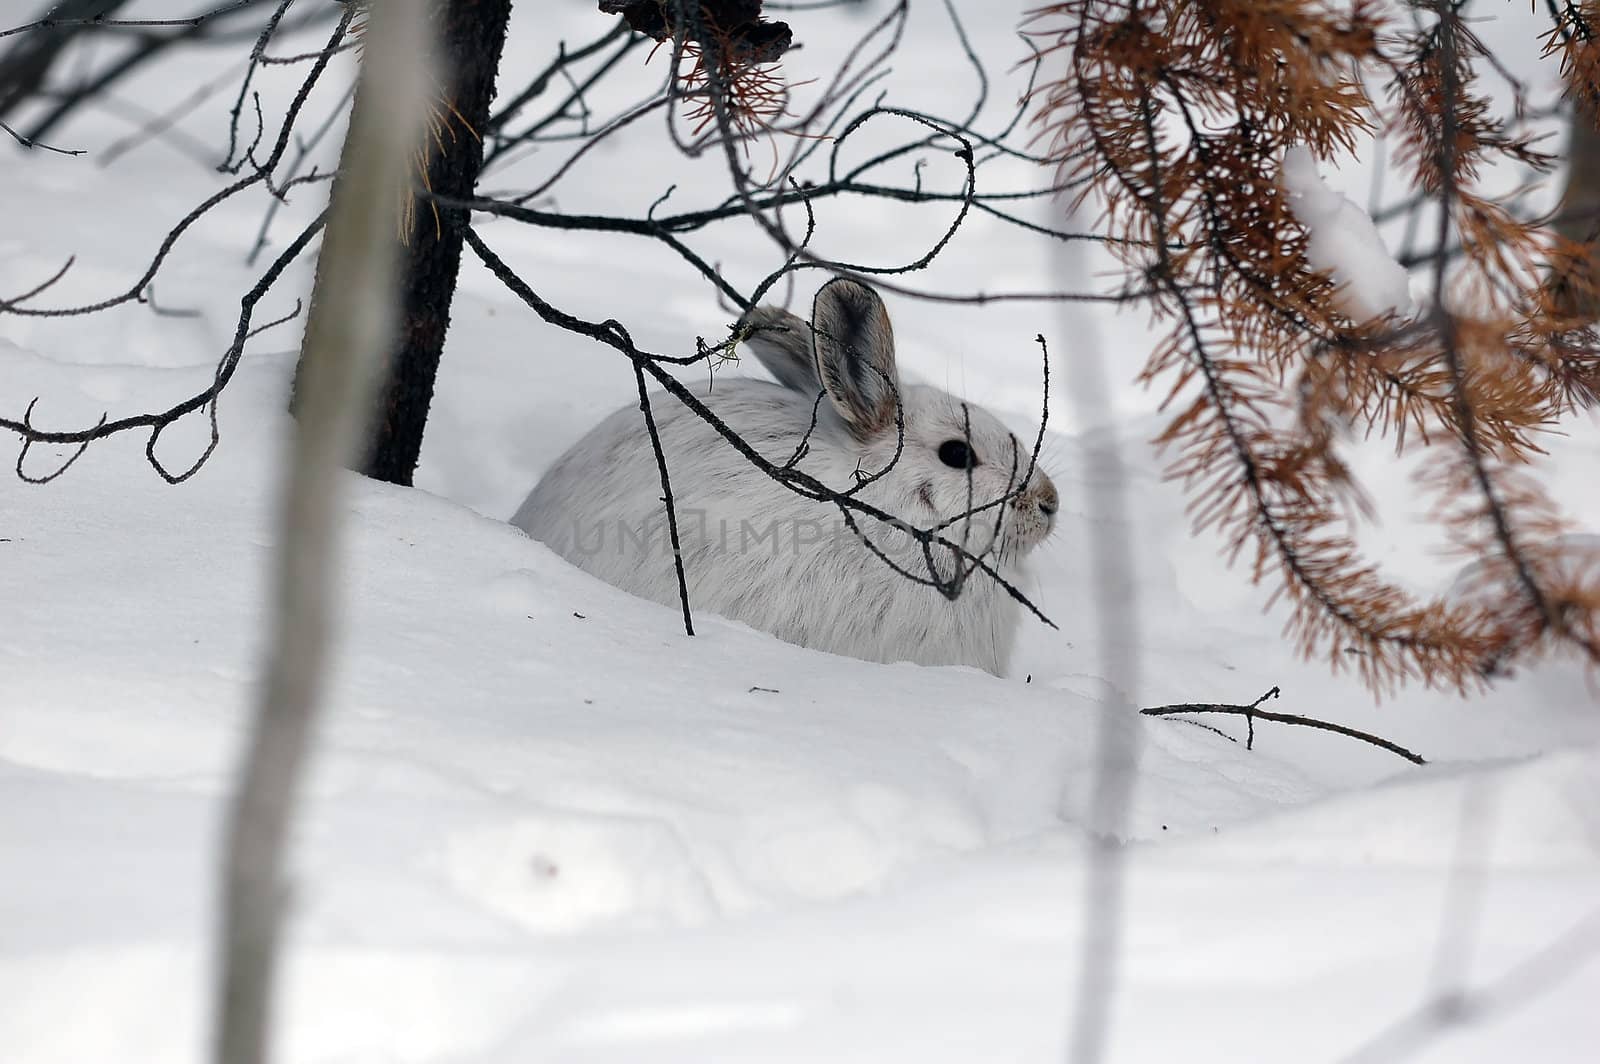 A white Snowshoe Hare in Winter